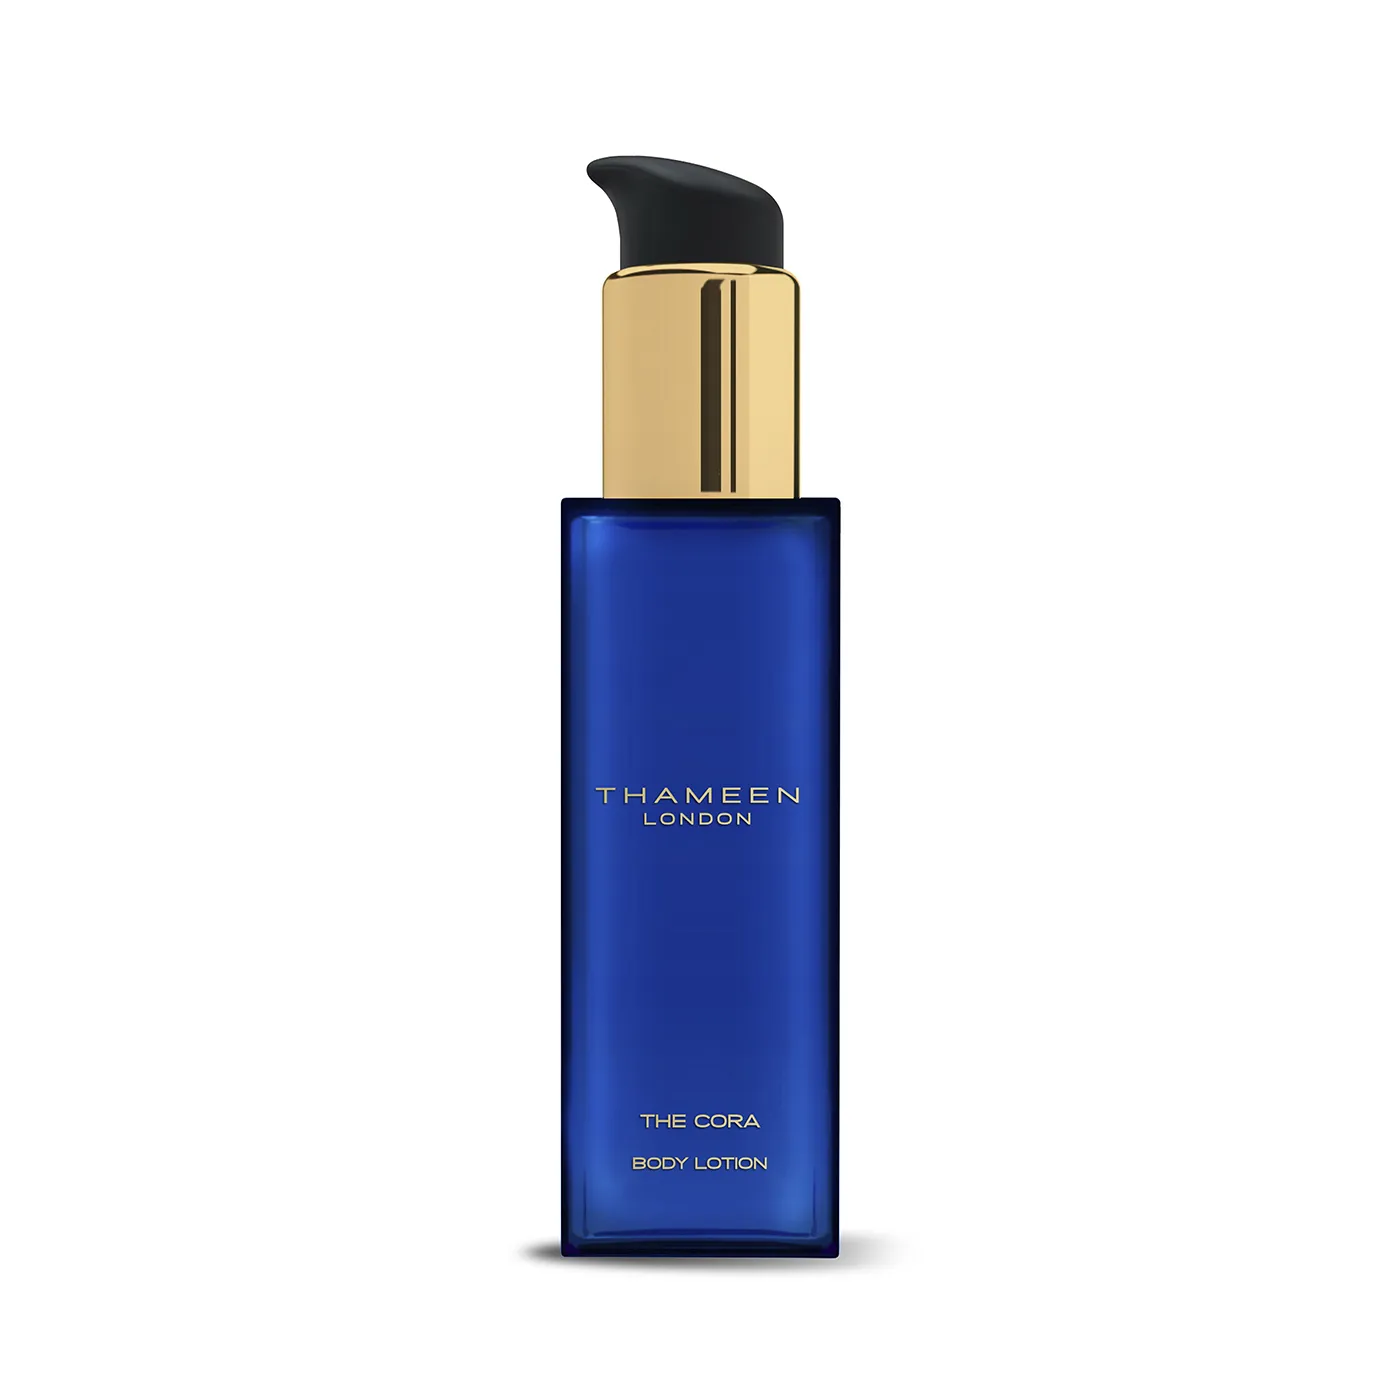 Thameen London - The Cora - Body Lotion